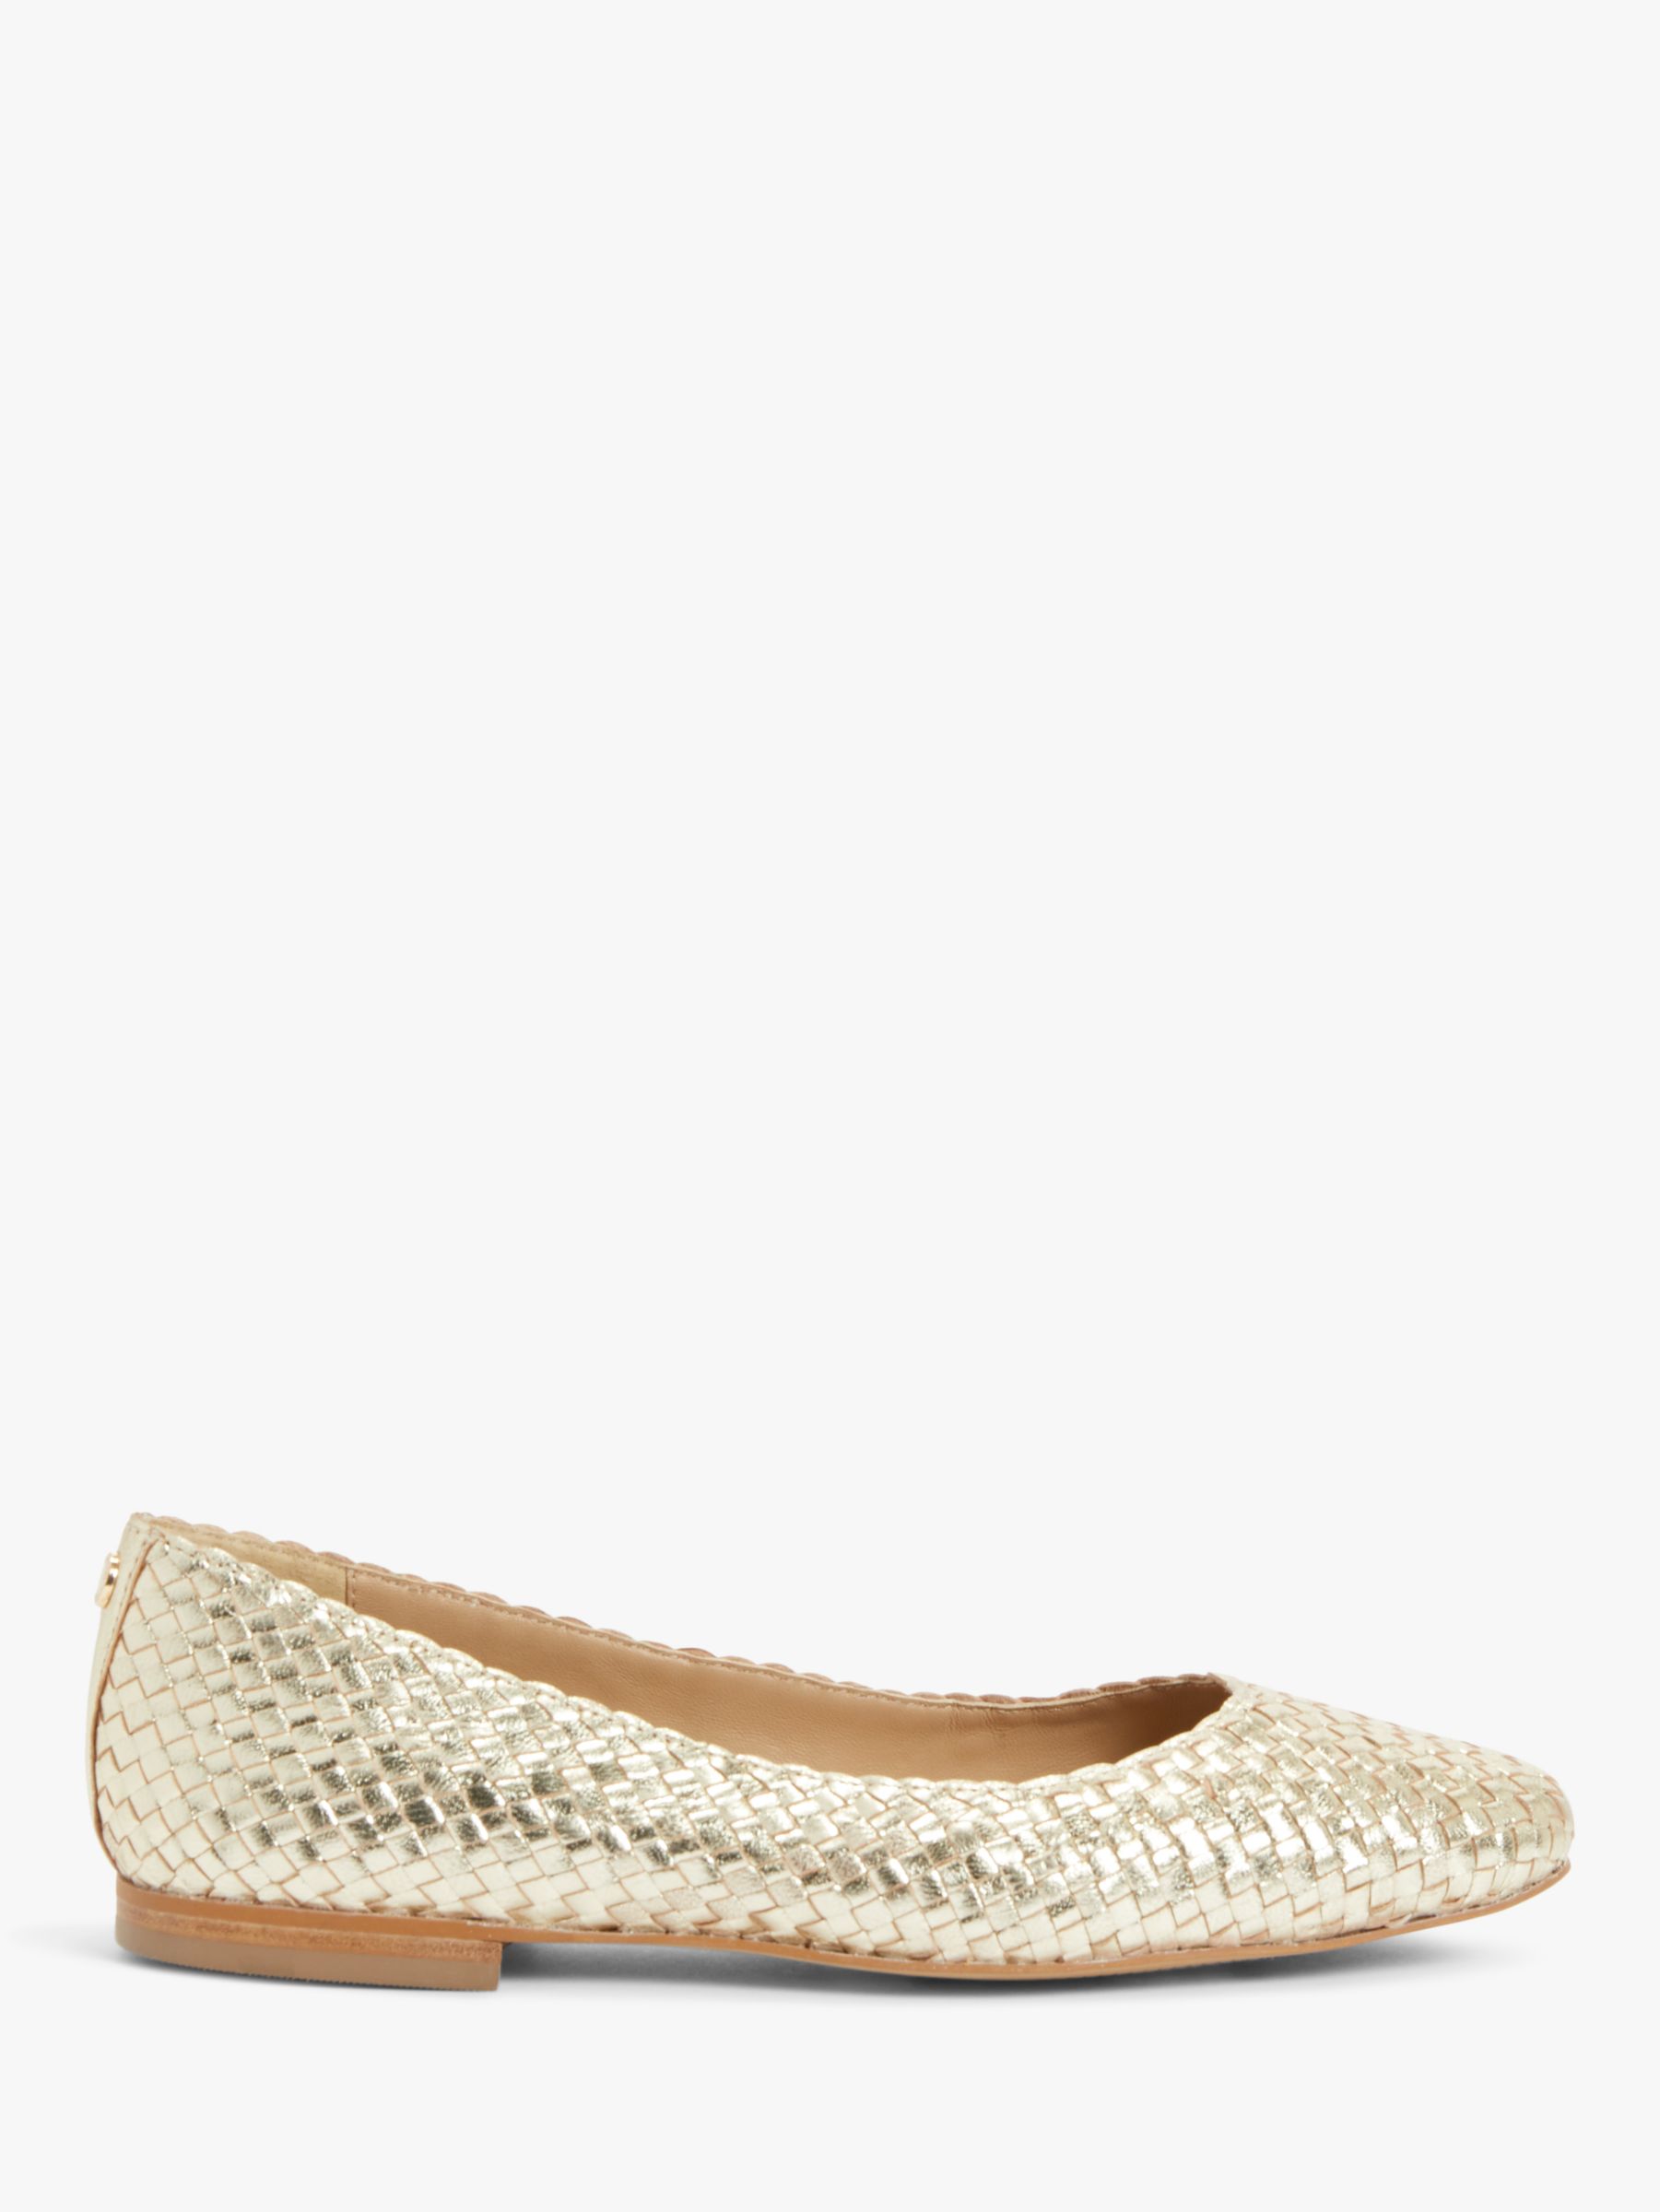 John Lewis Holly Leather Woven Ballerina Pumps, Gold at John Lewis ...